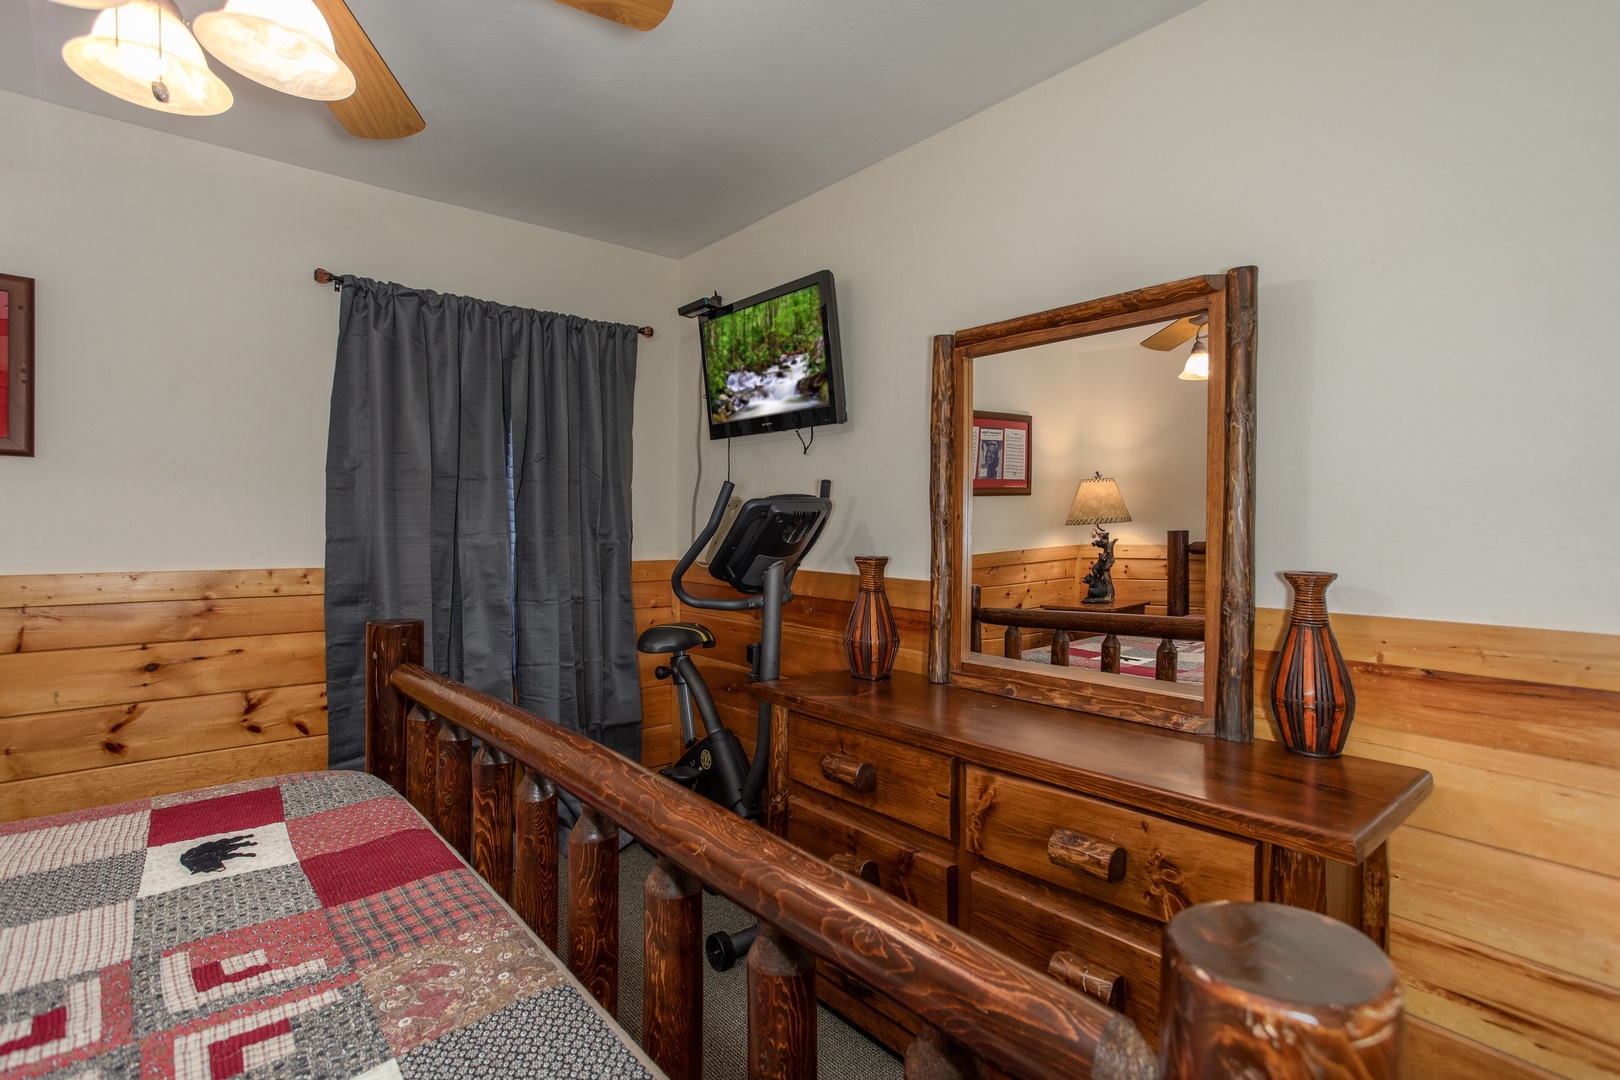 Dresser, exercise bike, and TV in a bedroom at Mountain Music, a 5 bedroom cabin rental located in Pigeon Forge